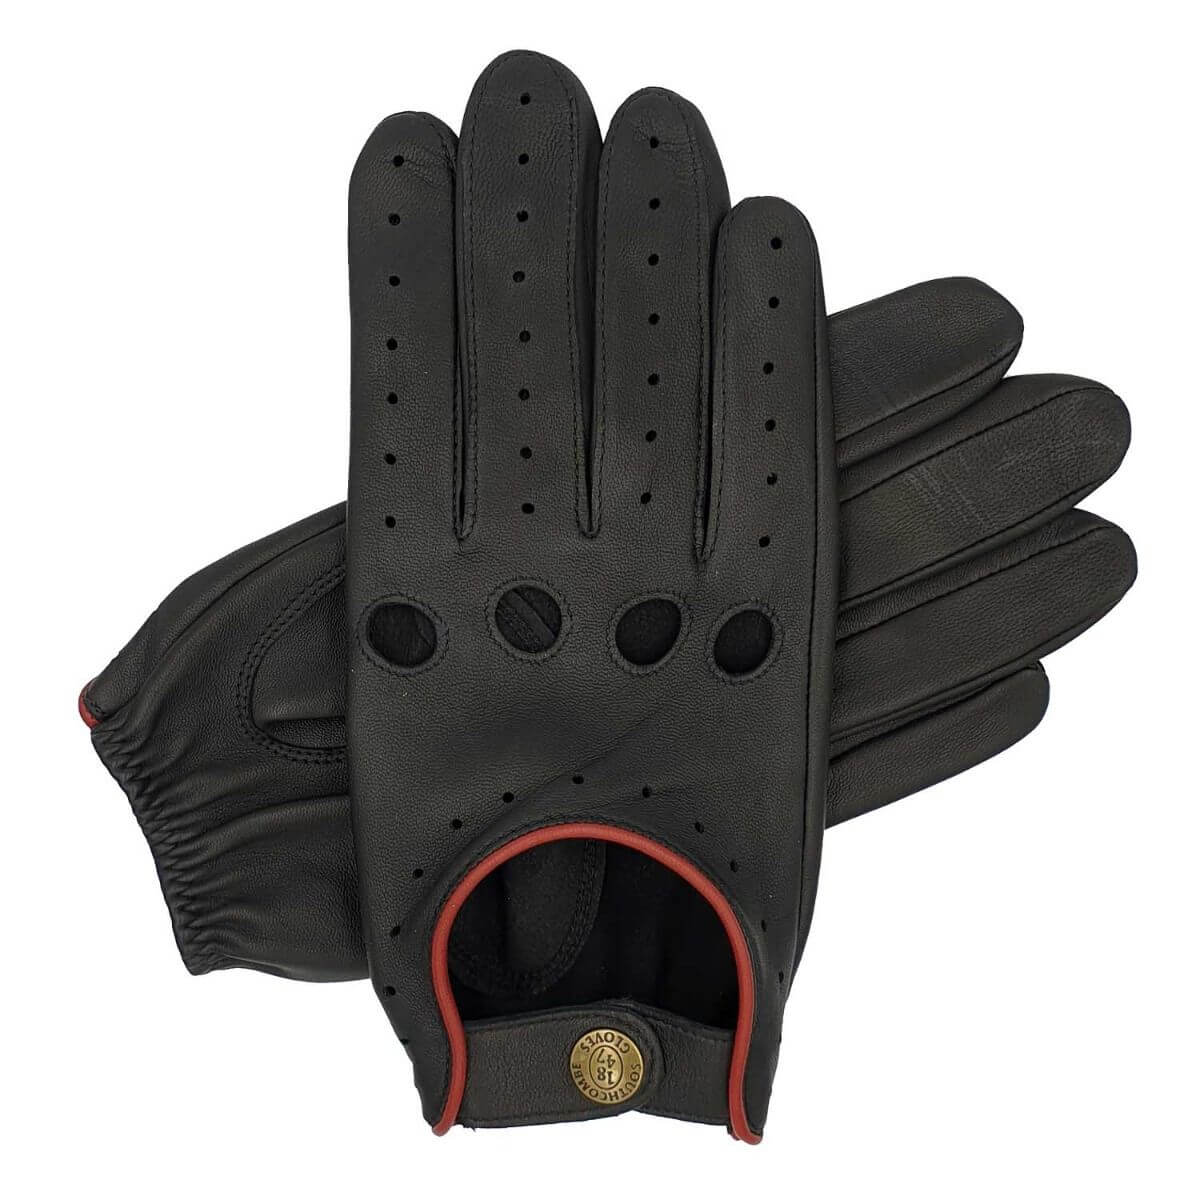 Southcombe Cooper - Men's Unlined Leather Driving Glove - Black/Red